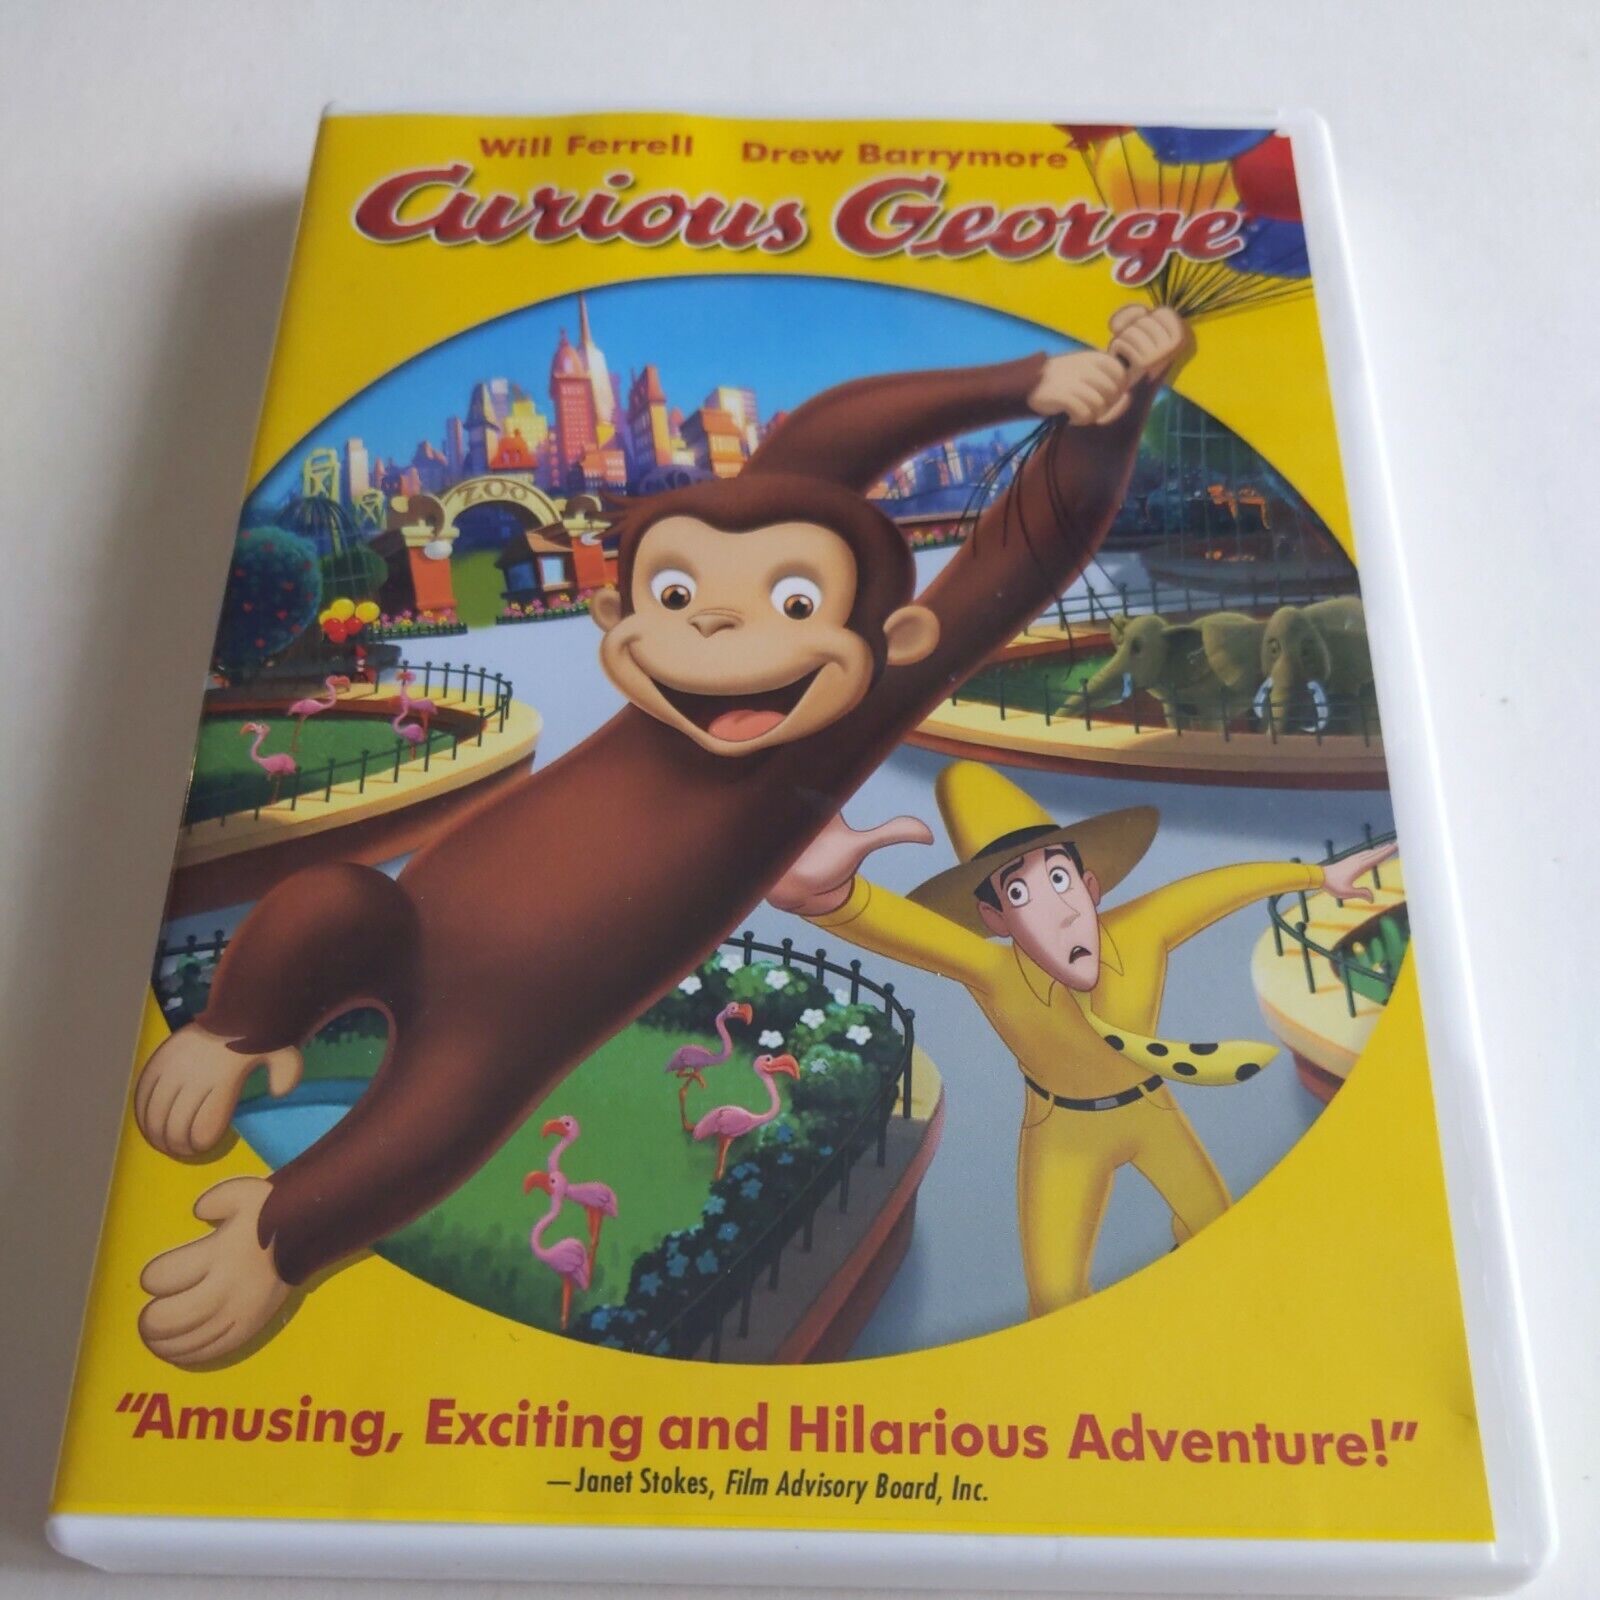 Curious George Full Screen DVD Movie Will Ferrell Drew Barrymore